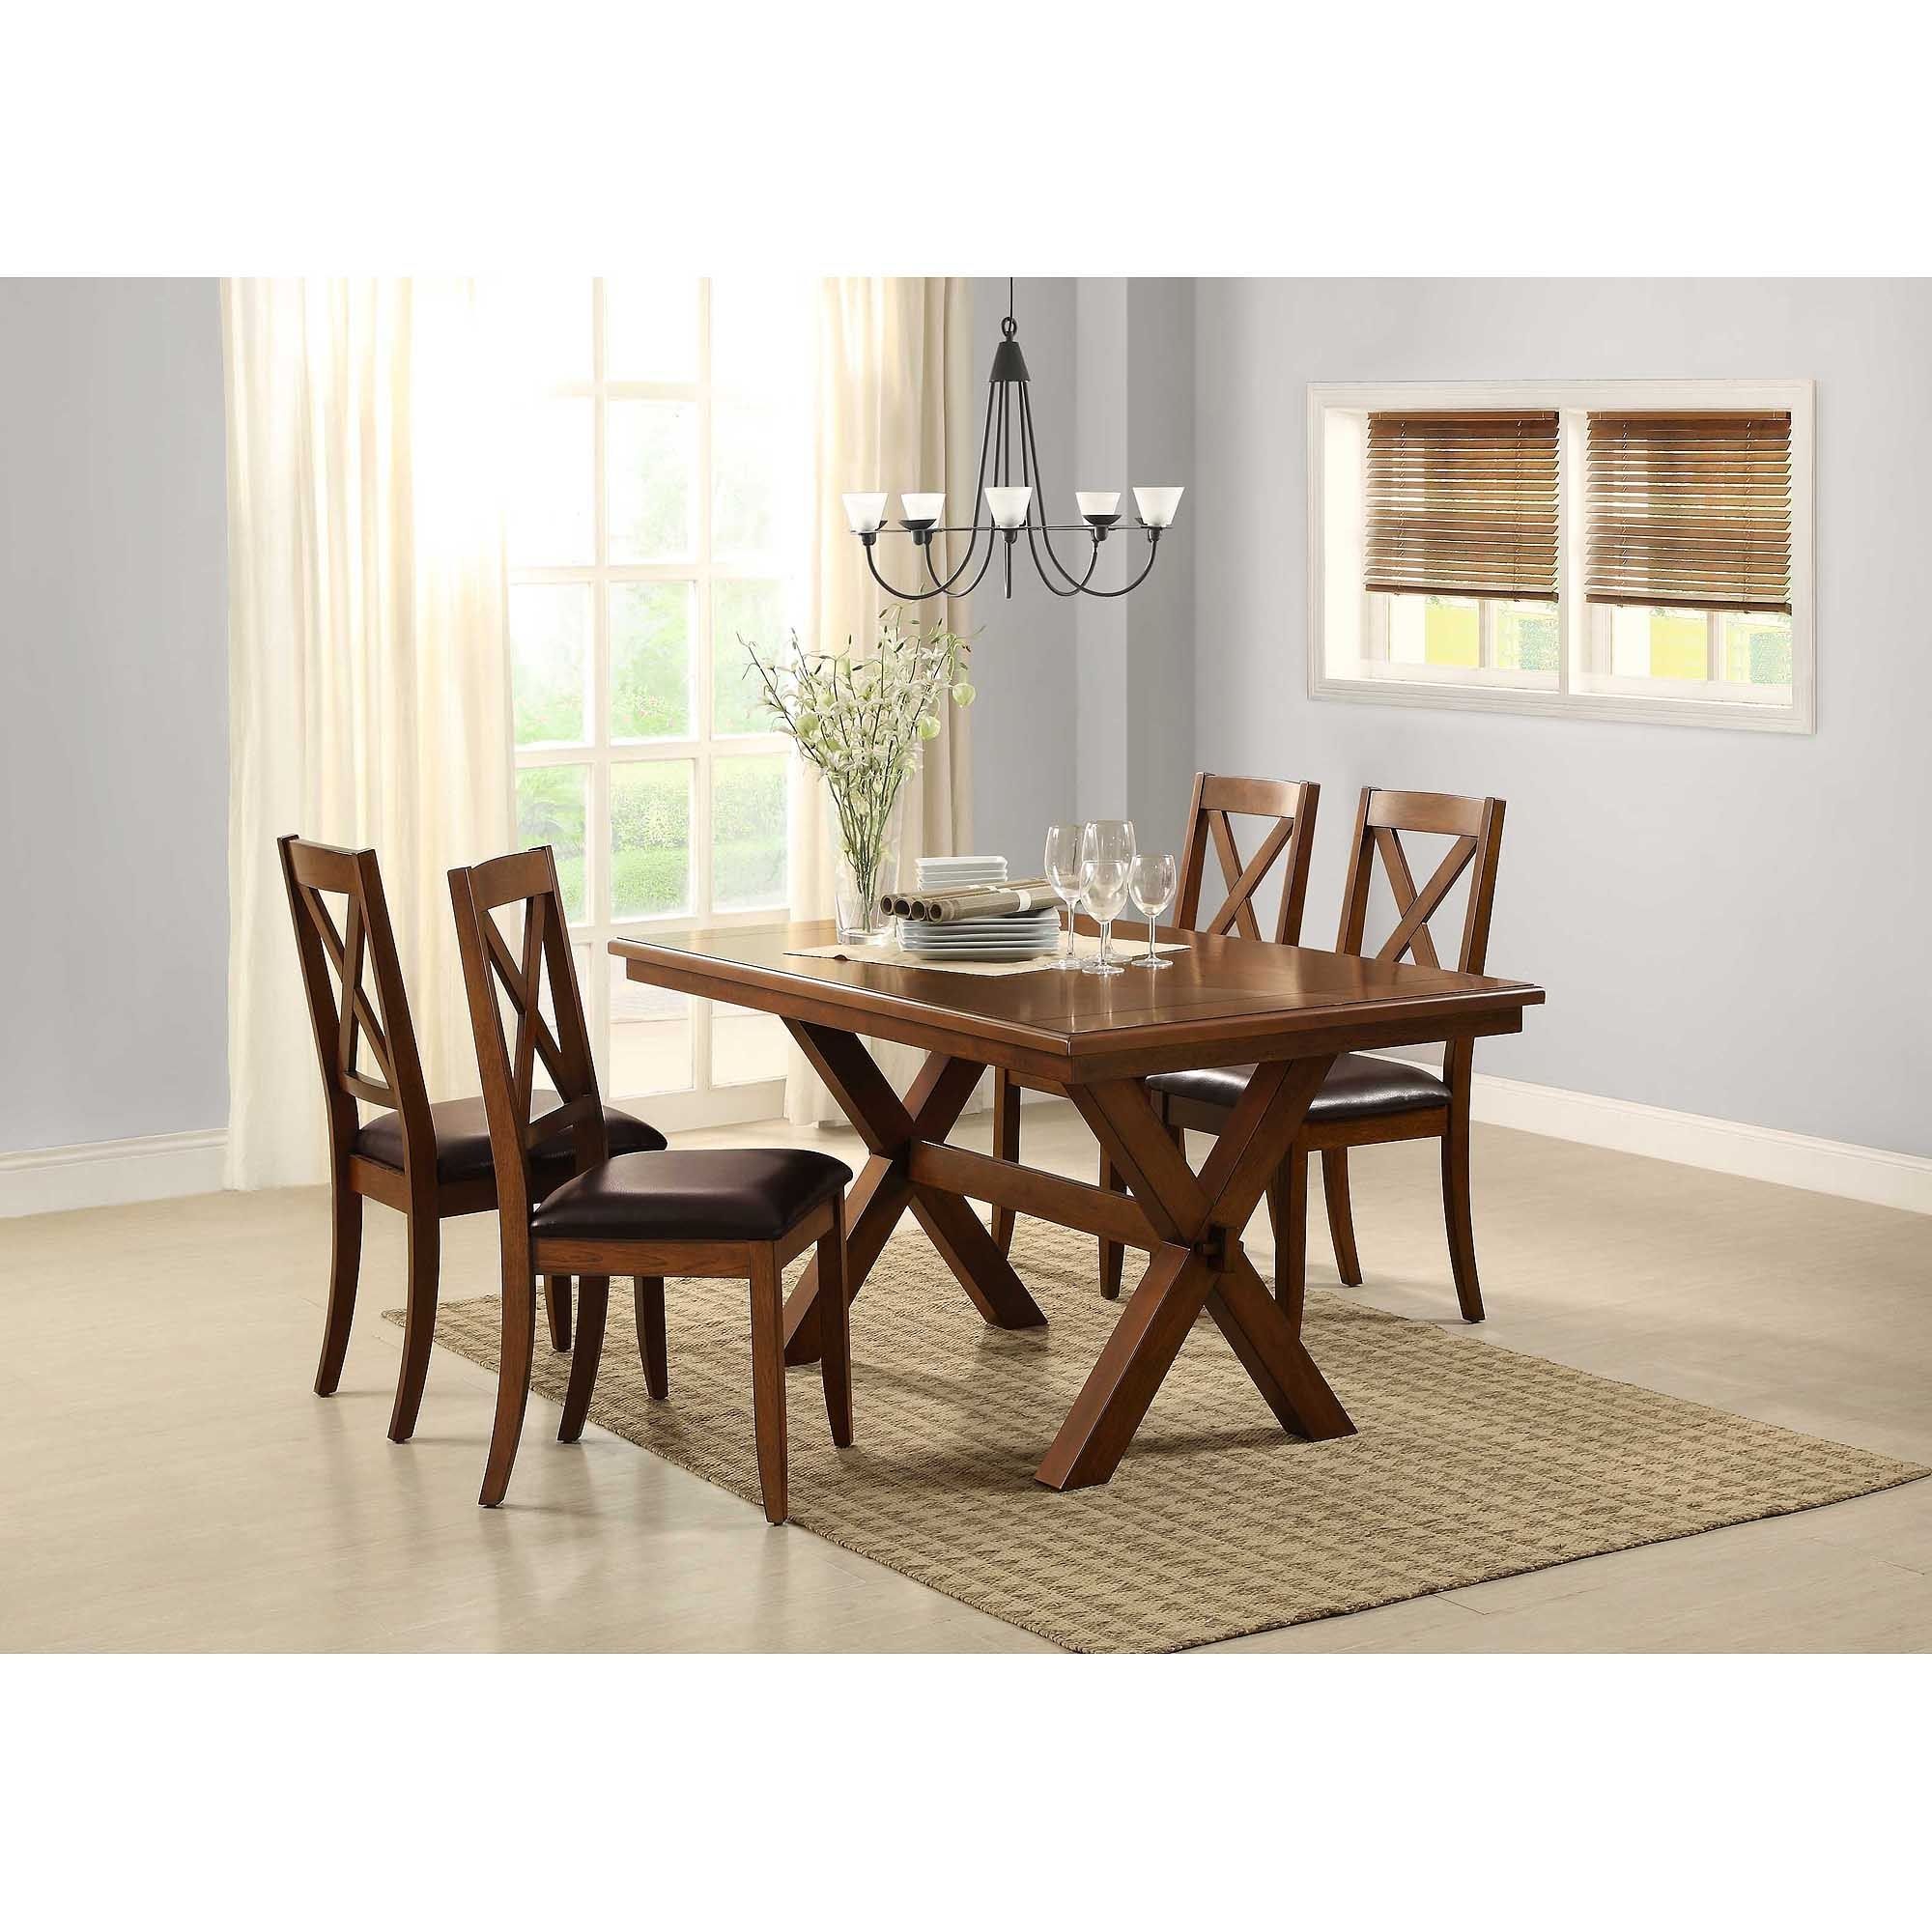 Better Homes & Gardens Maddox Crossing Dining Table, Brown – Walmart Pertaining To Current Garden Dining Tables And Chairs (View 22 of 25)